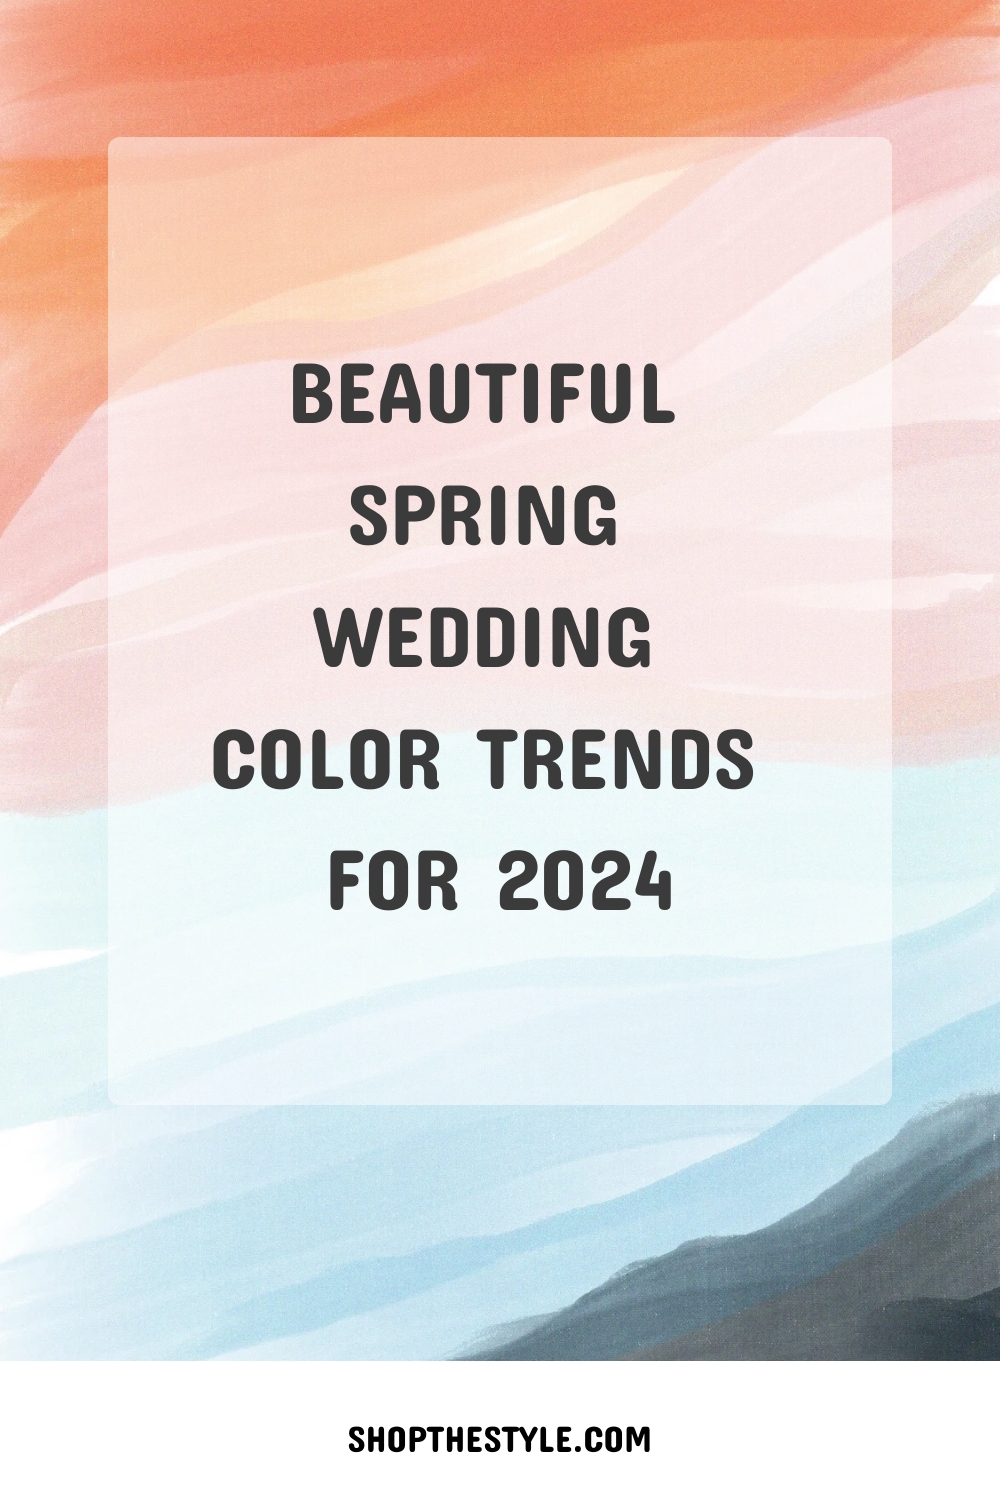 Beautiful Spring Wedding Color Trends for 2024